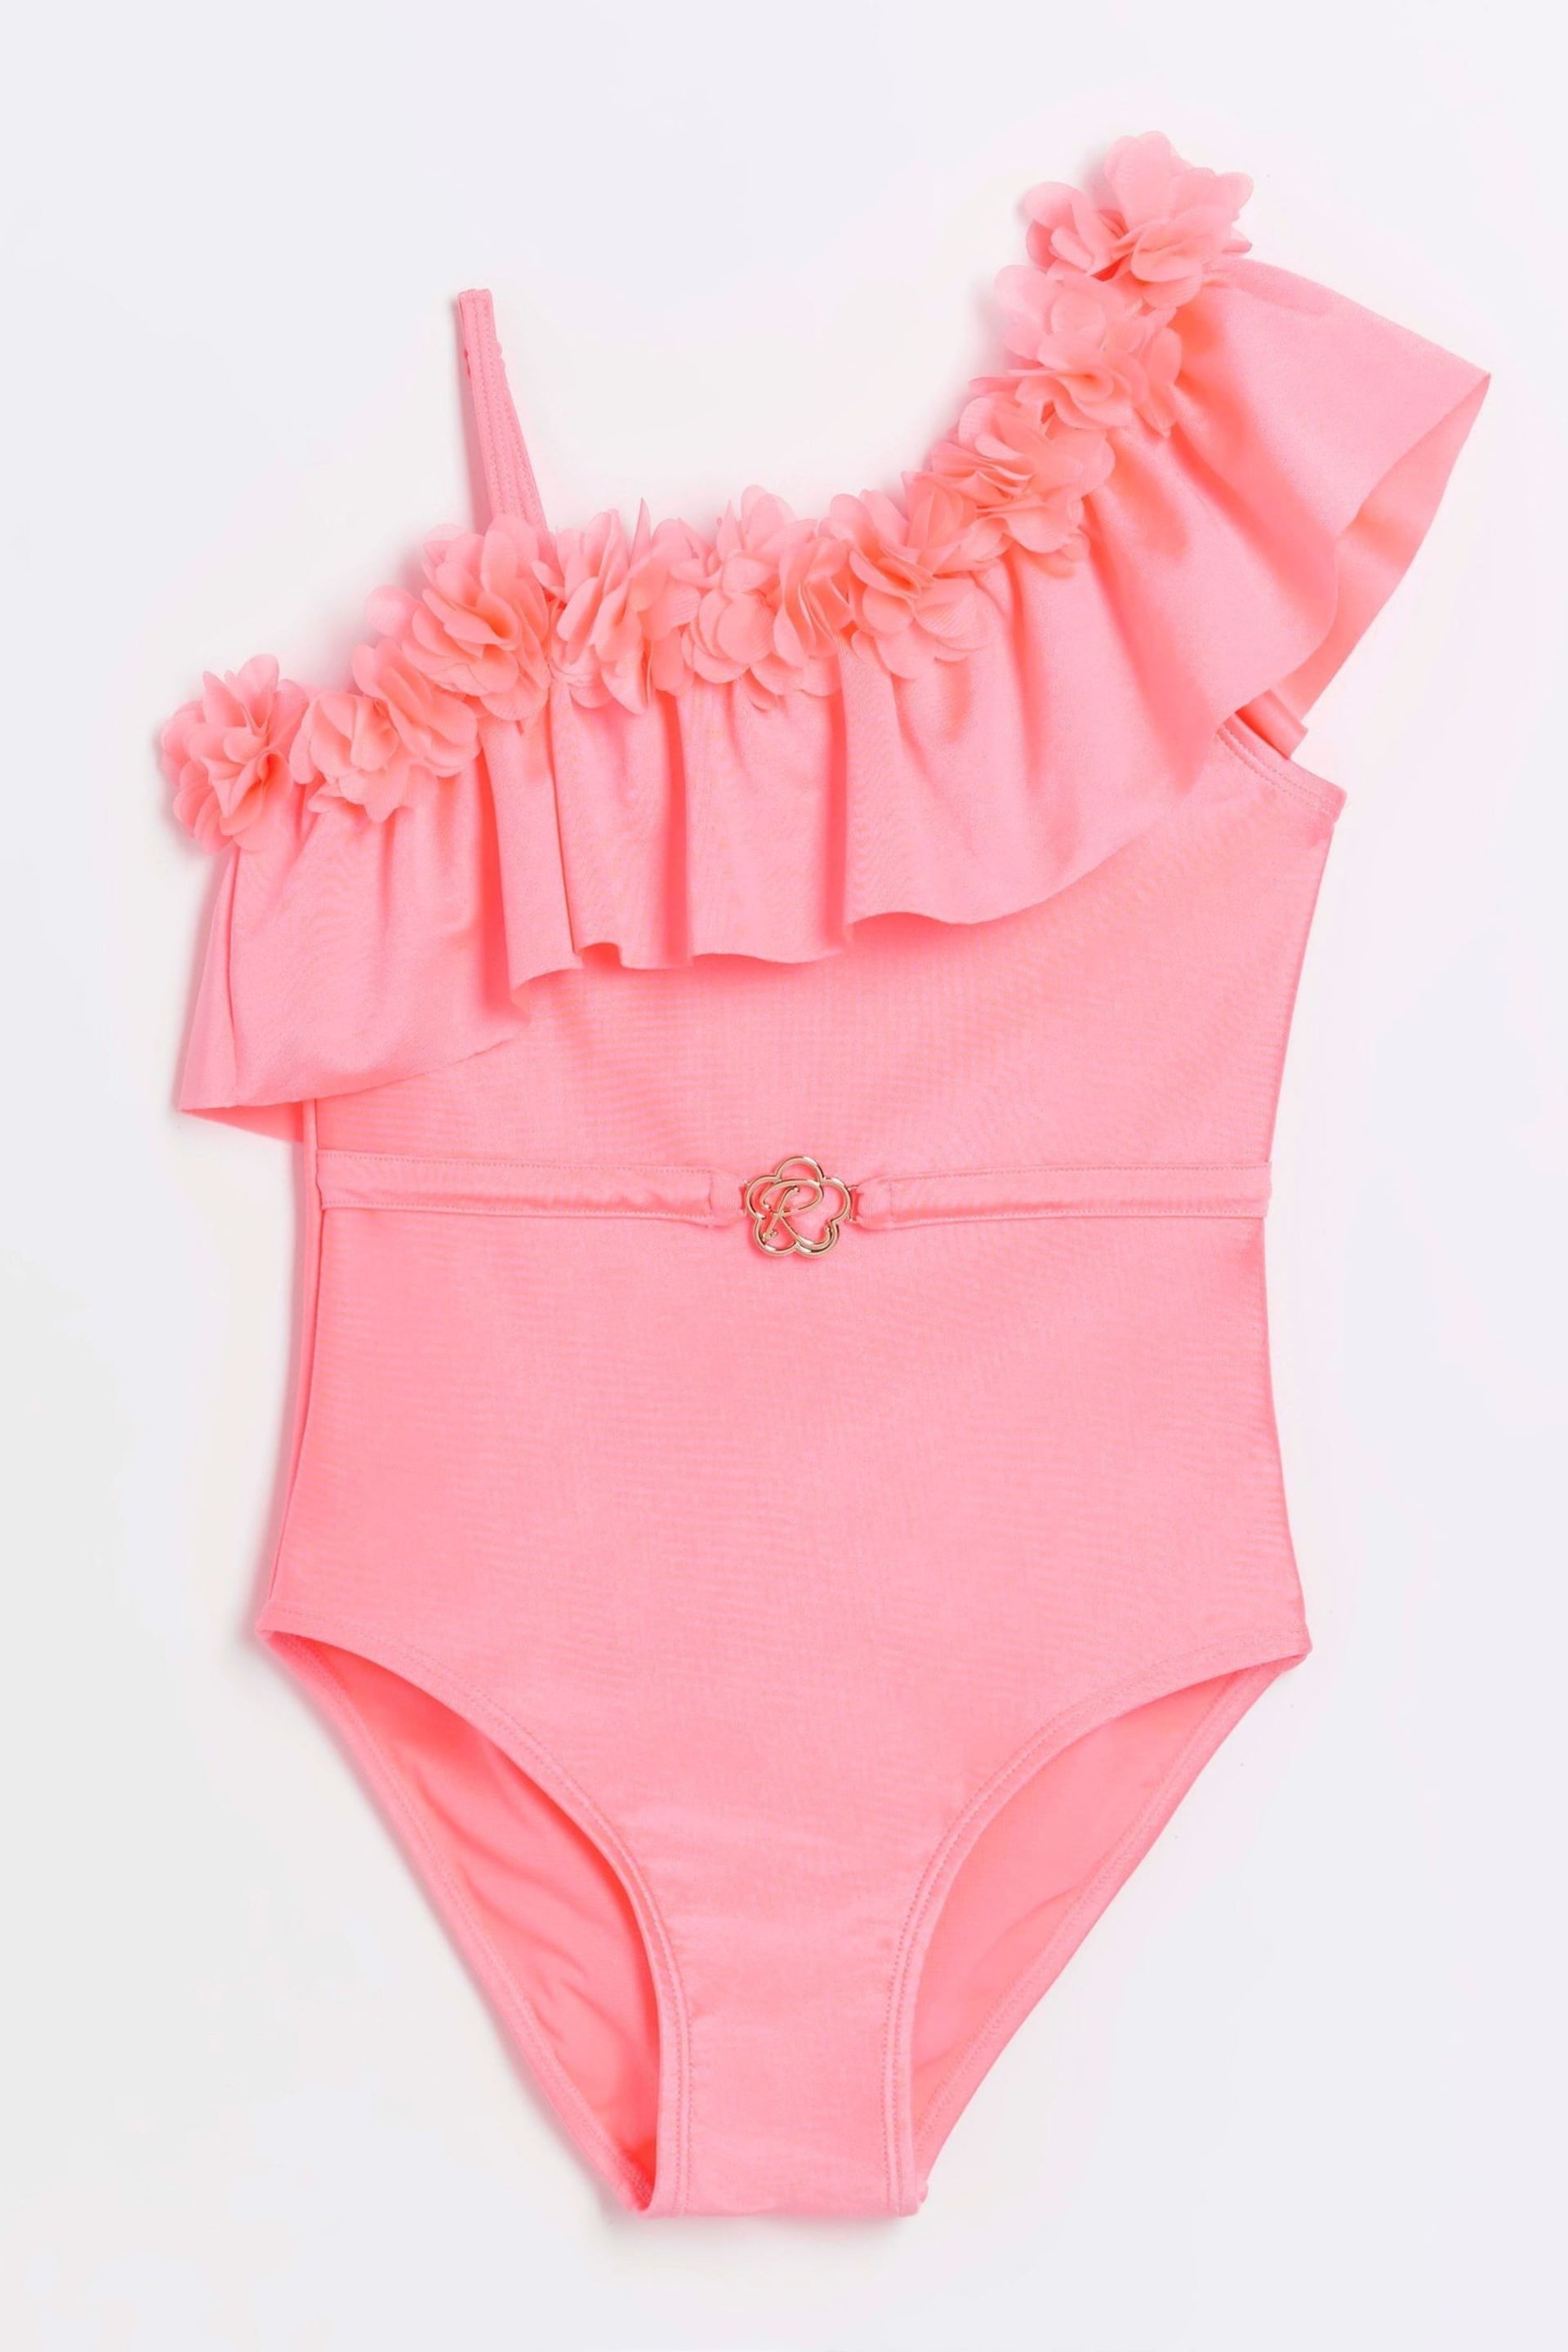 River Island Pink Girls Floral Swimsuit - Image 1 of 4